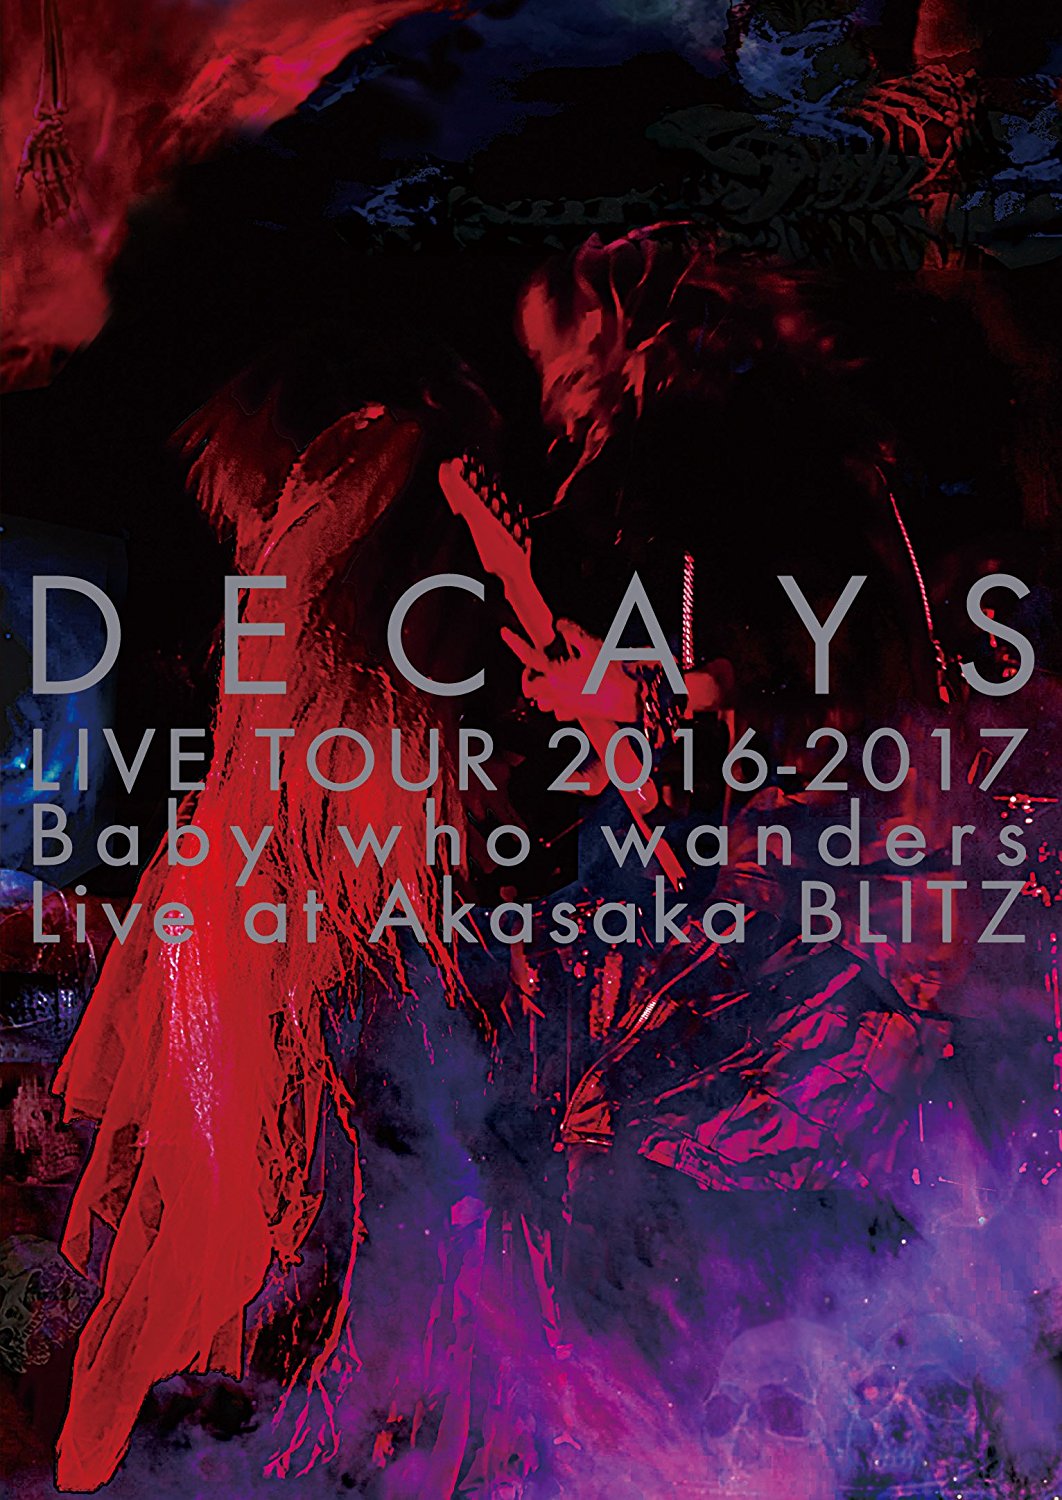 DECAYS ( ディケイズ )  の DVD DECAYS LIVE TOUR 2016-2017 Baby who wanders Live at Akasaka BLITZ